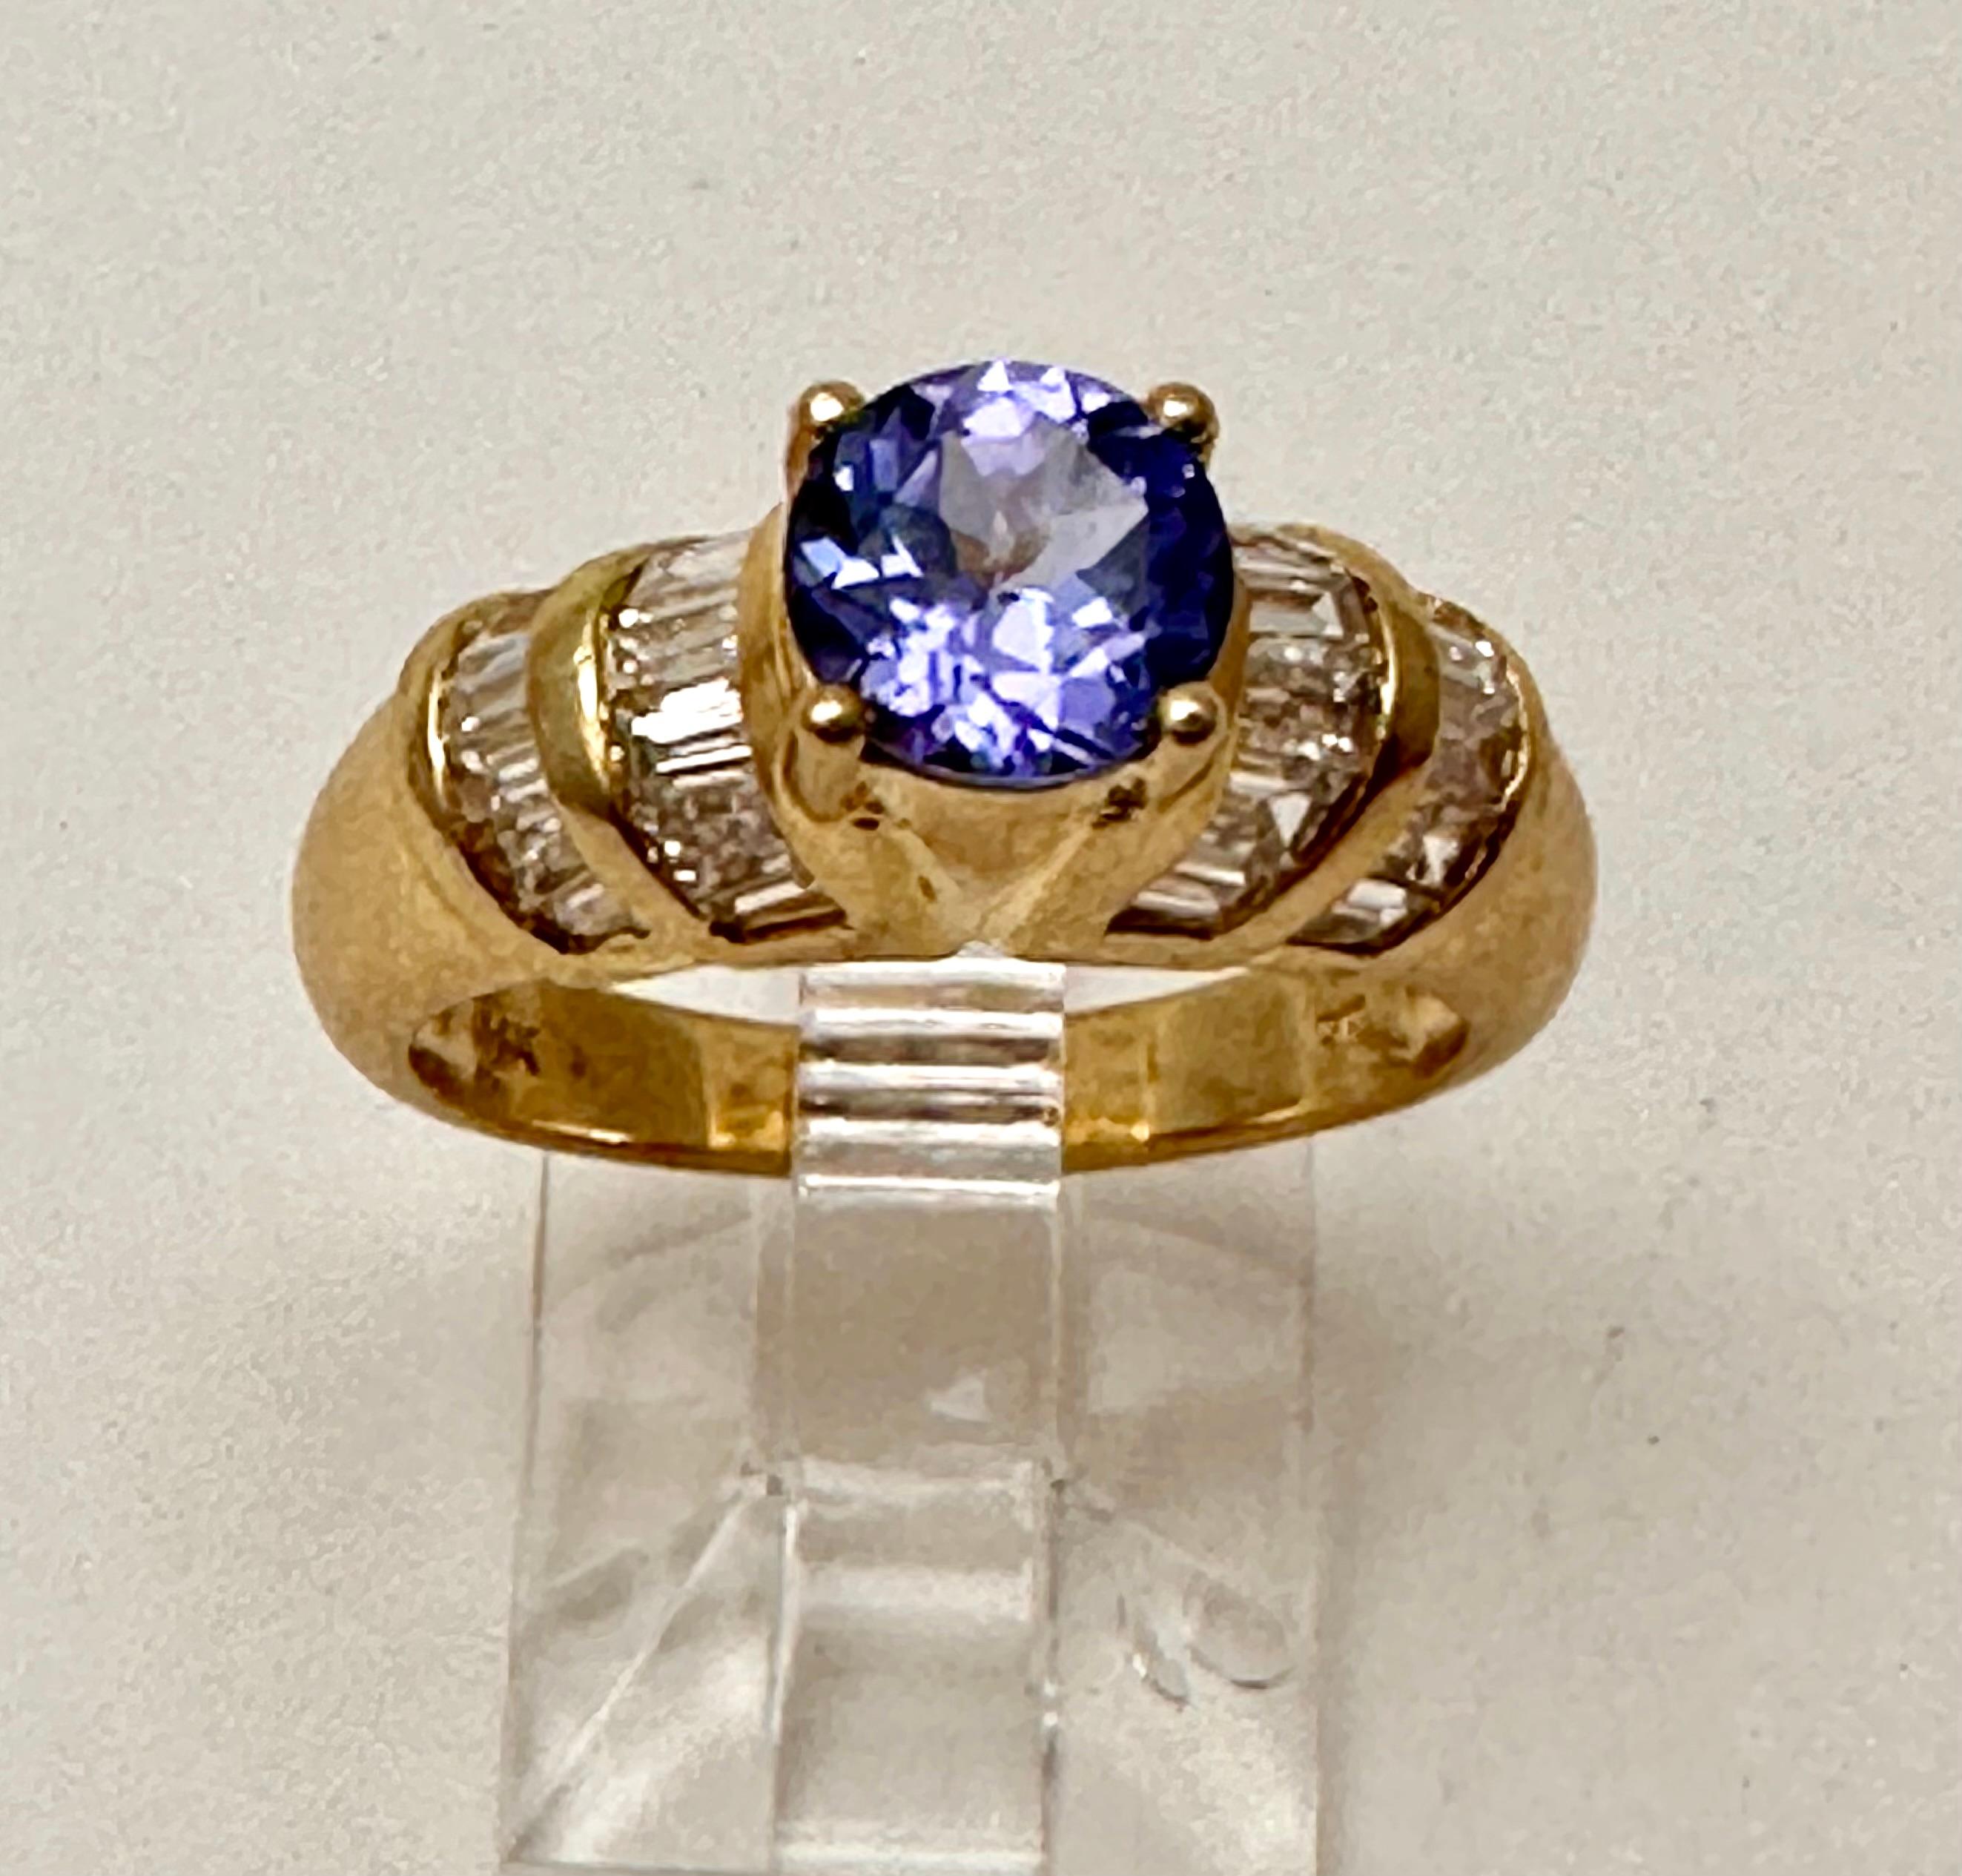 14k Yellow Gold 6.5mm Round Tanzanite Diamond Ring Size 6.5 
Two Rows of Baguettes on each side...beautiful ring 

Tanzanite 

Tanzanite changes colors when it is viewed from different directions. This shifting of colors has been said to facilitate